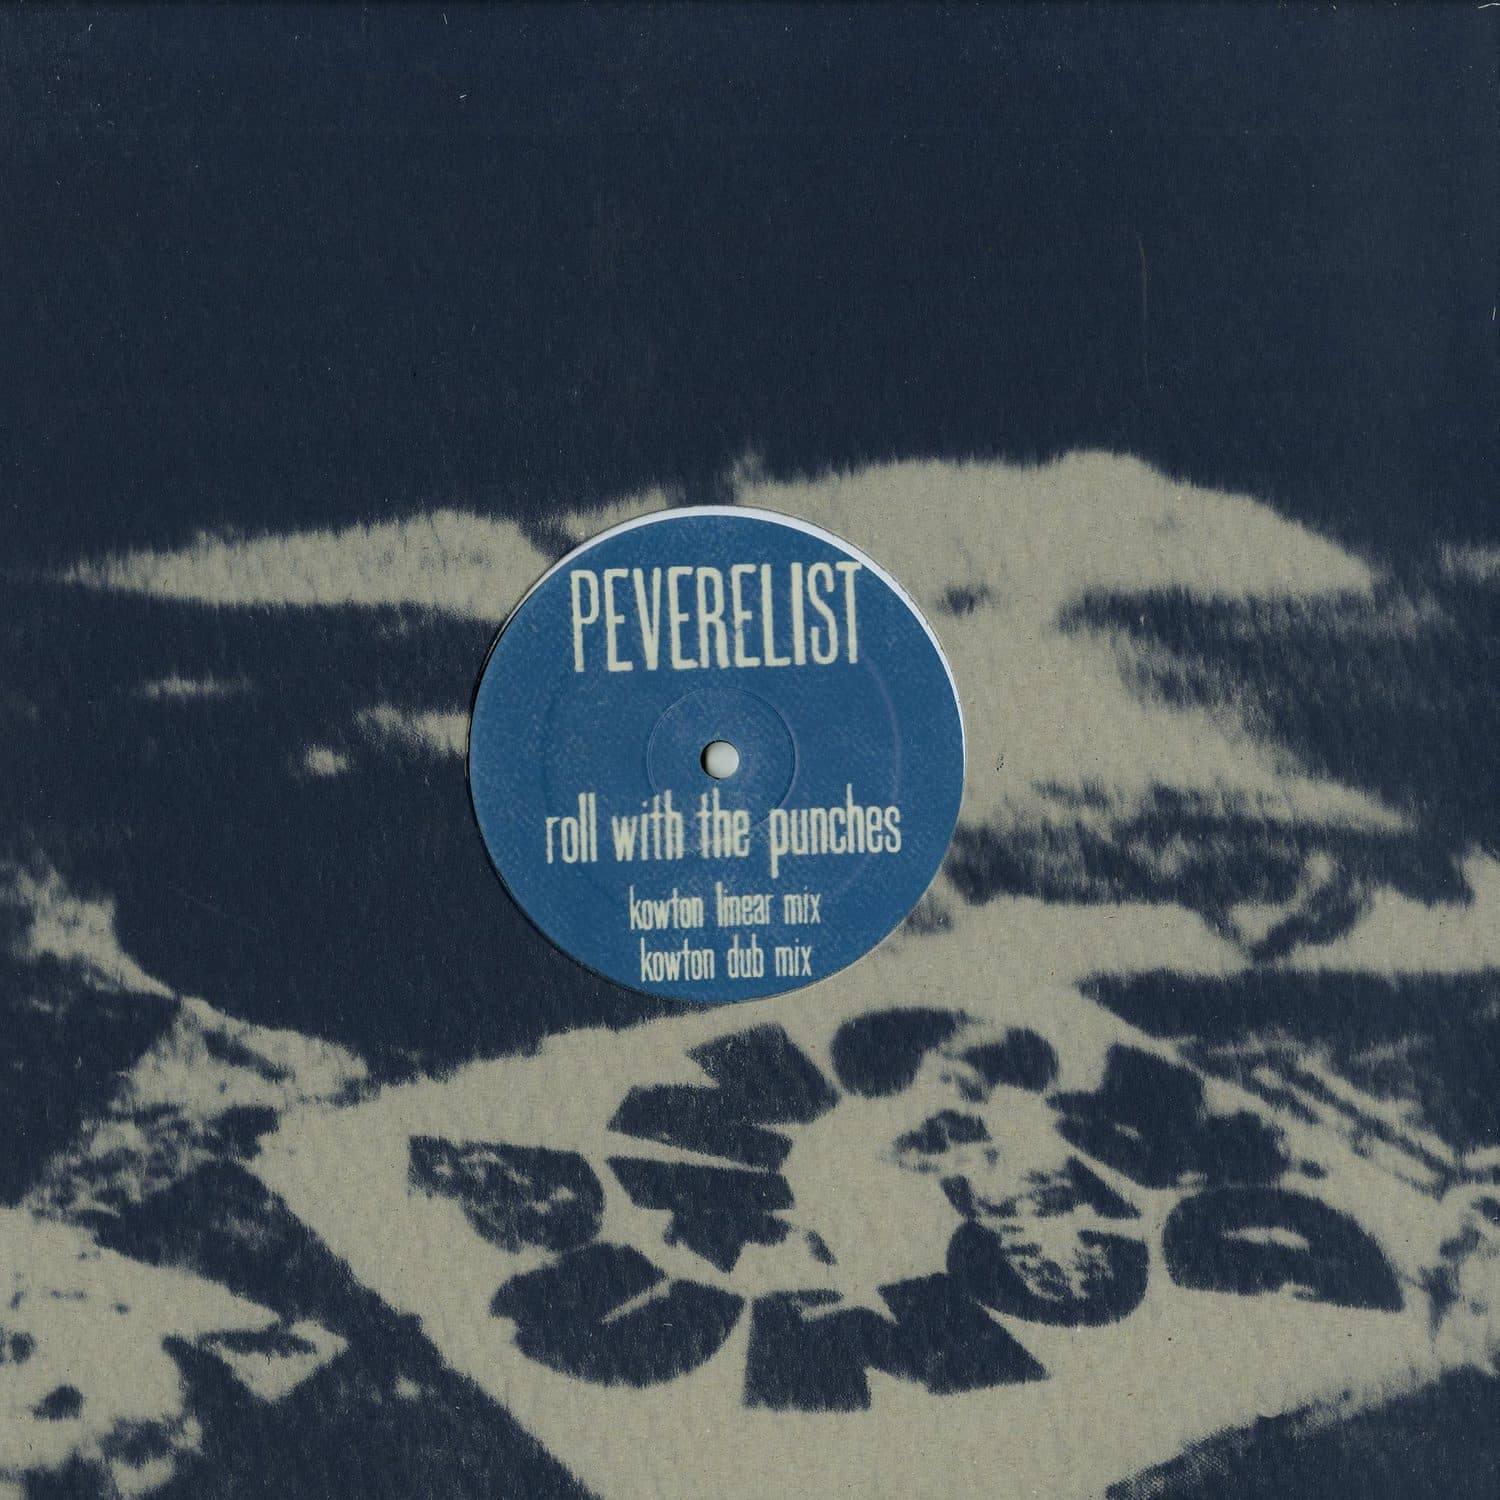 Perverelist - ROLL WITH THE PUNCHES 